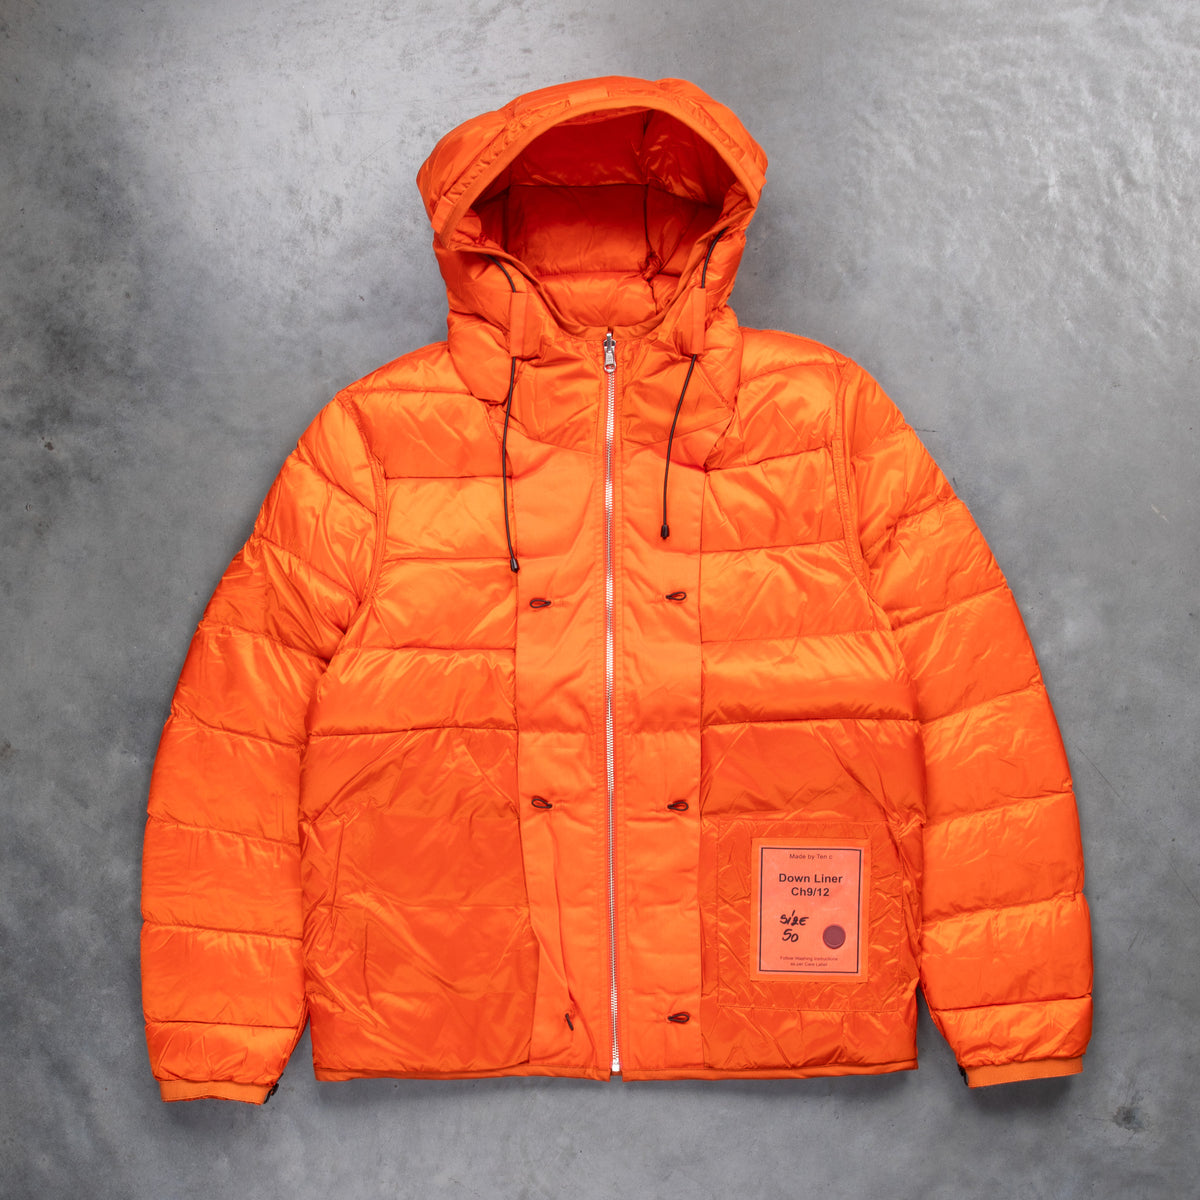 Ten C Hooded Down Liner with pockets Orange Frans Boone Exclusive ...